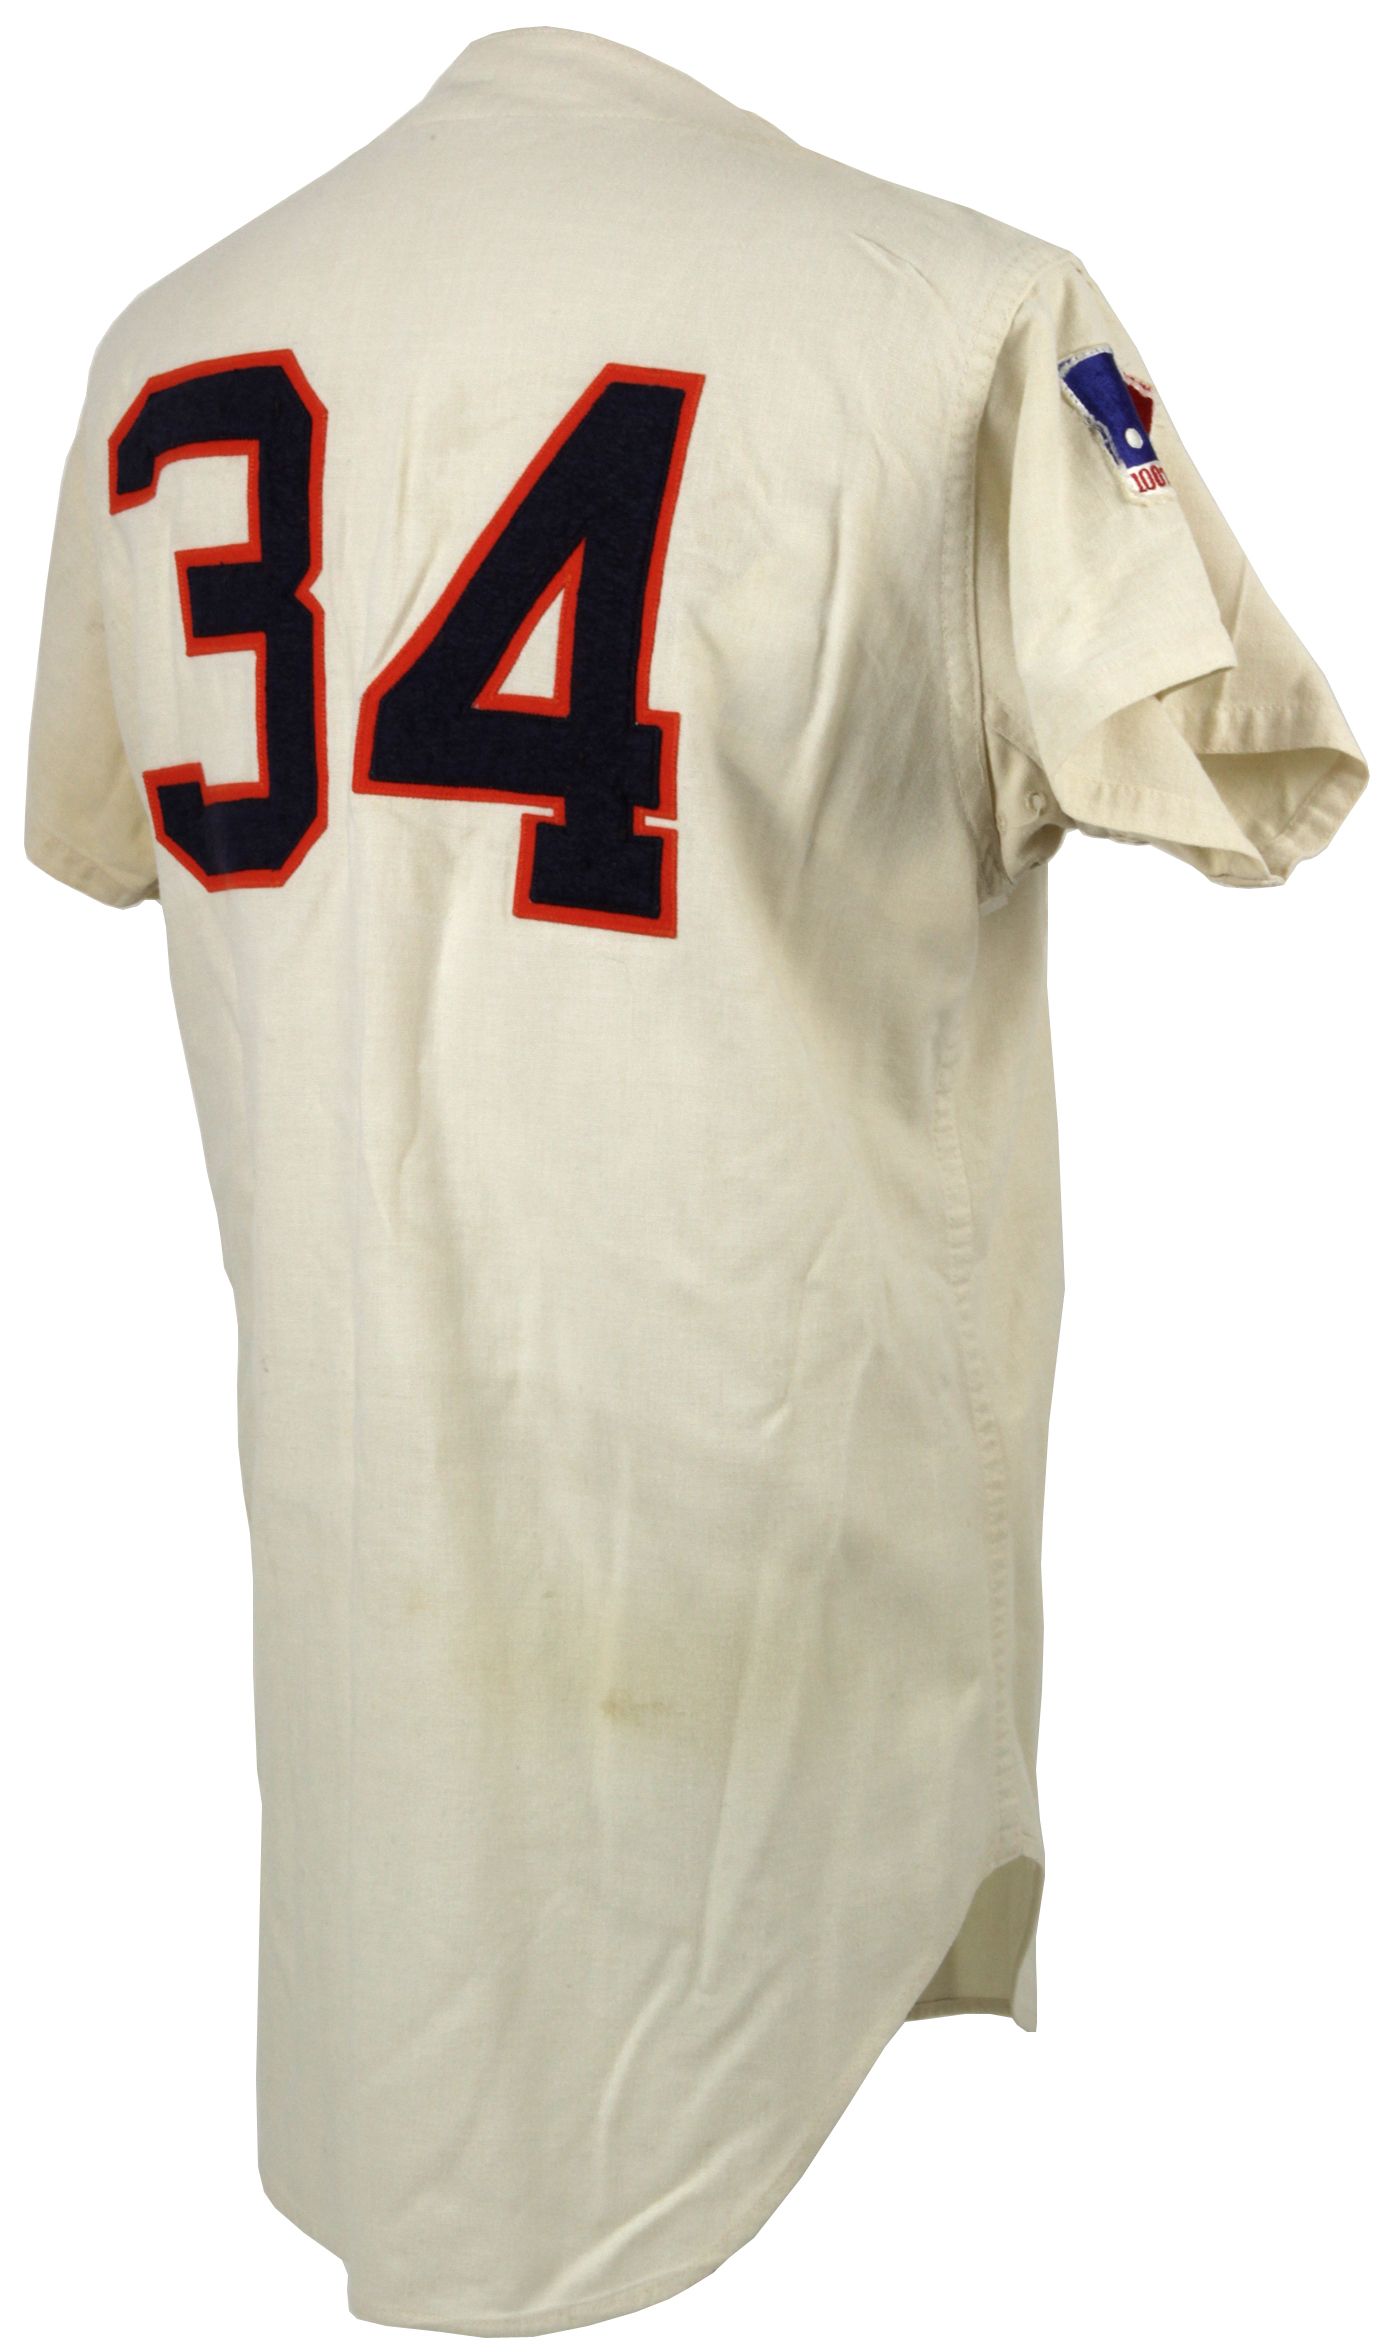 Today in Texas History - 1965 Houston Astros jersey